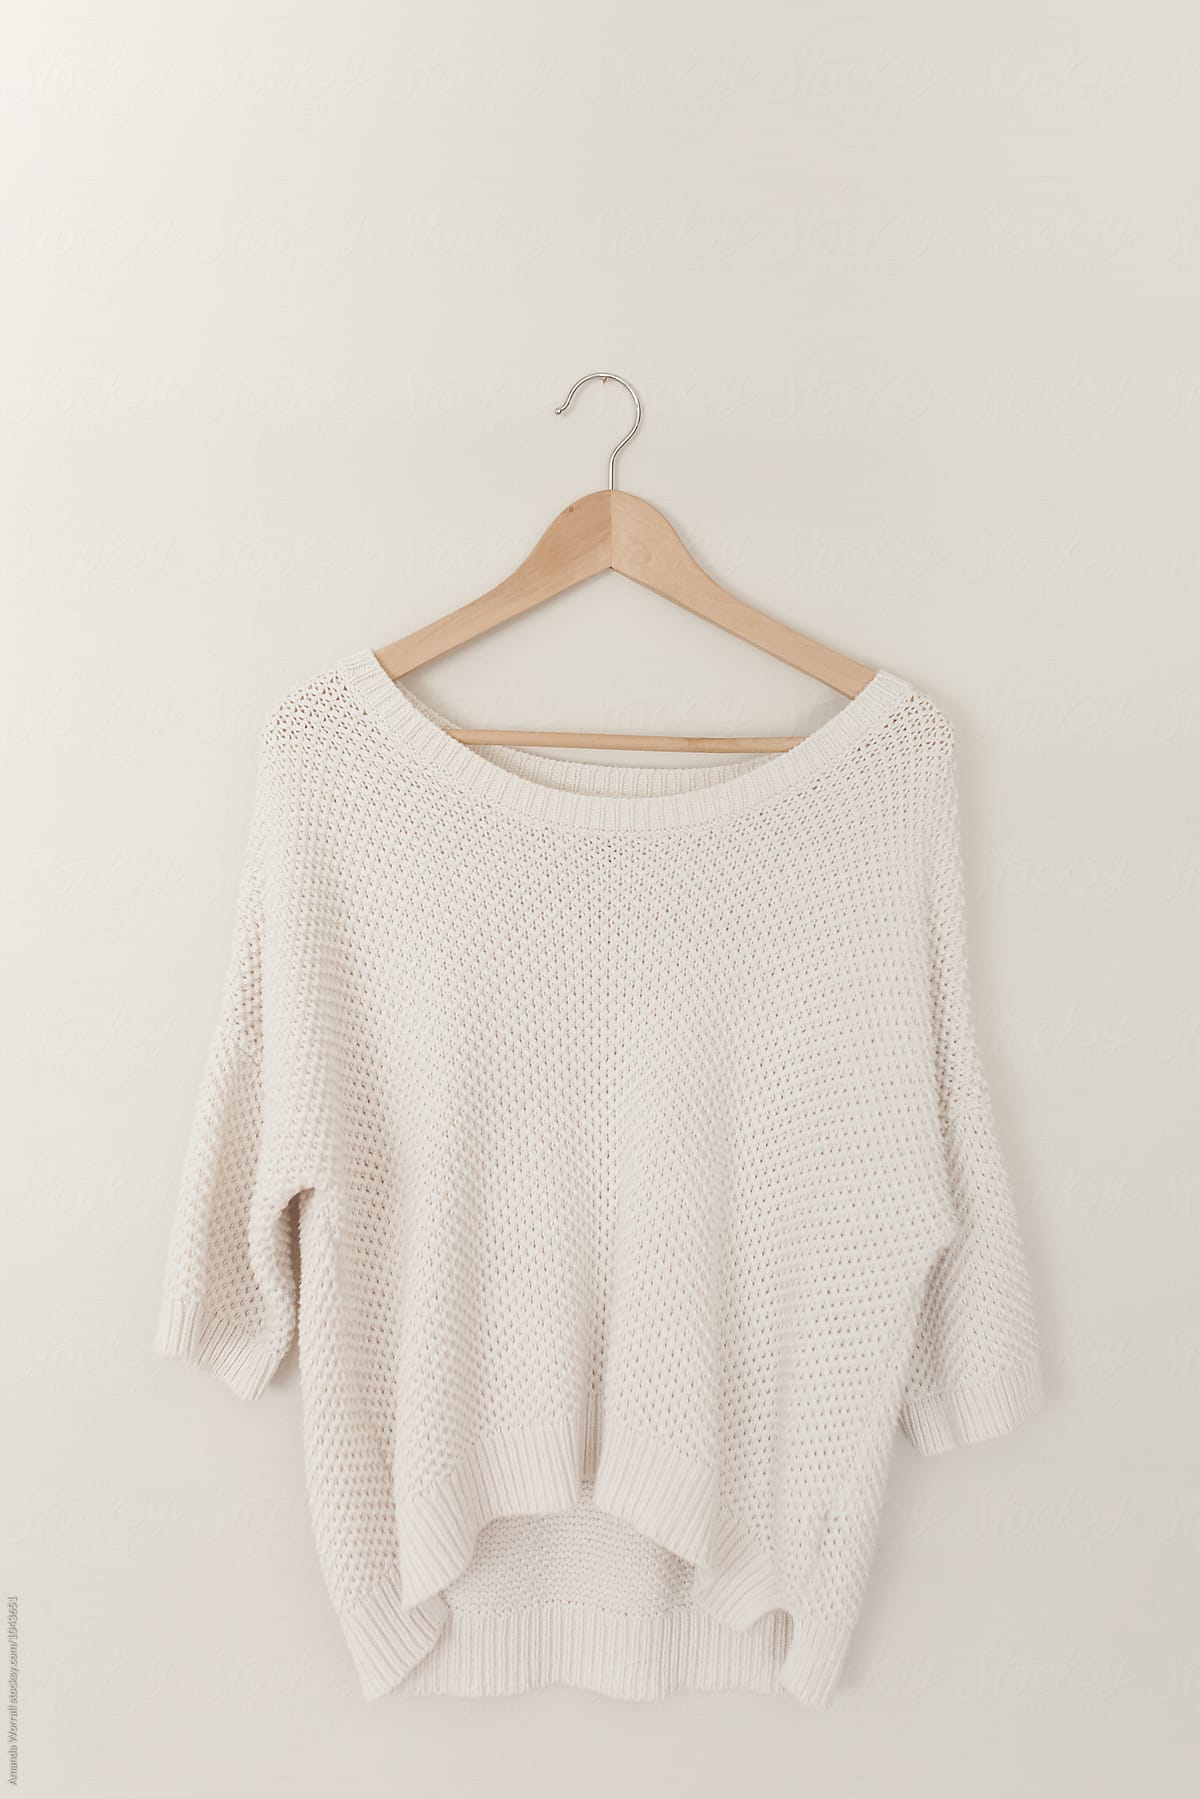 A minimalist image of an off white sweater hanging on a wood hanger by ...